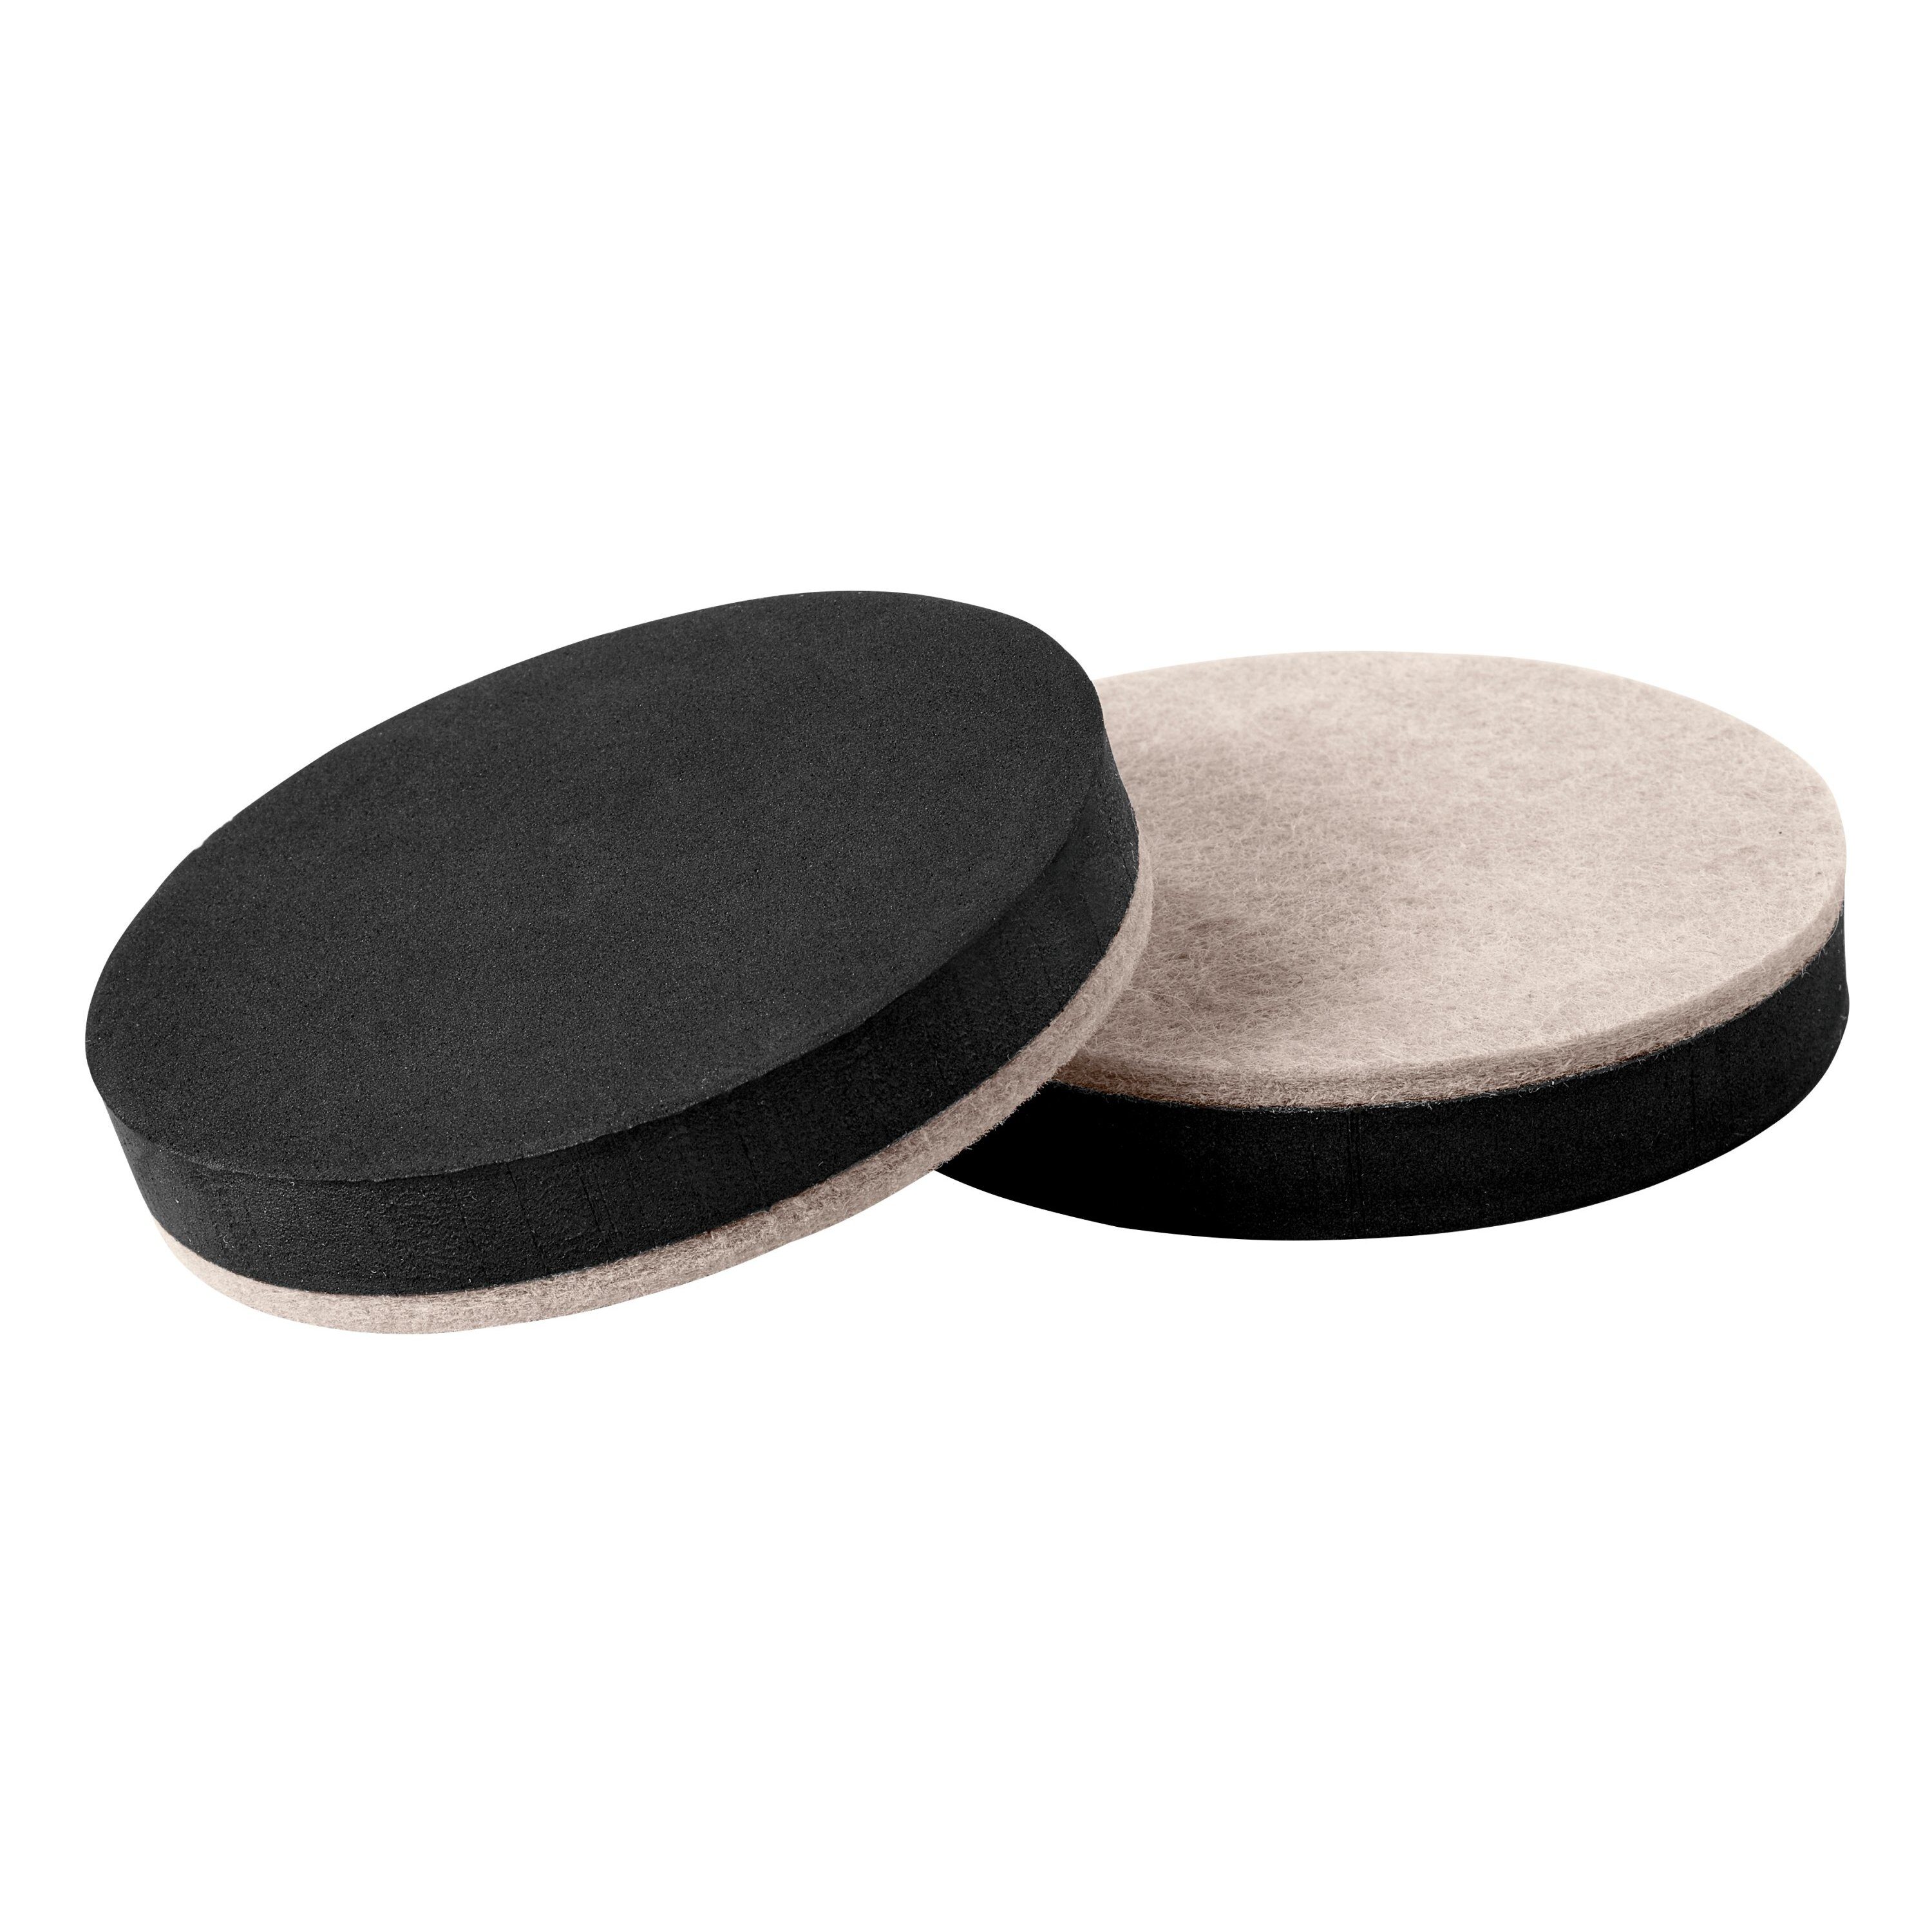 2-1/2 (64MM) Heavy Duty Felt Sliders - Adhesive Back - Pack of 16pcs -  LINCO CASTERS & INDUSTRIAL SUPPLY